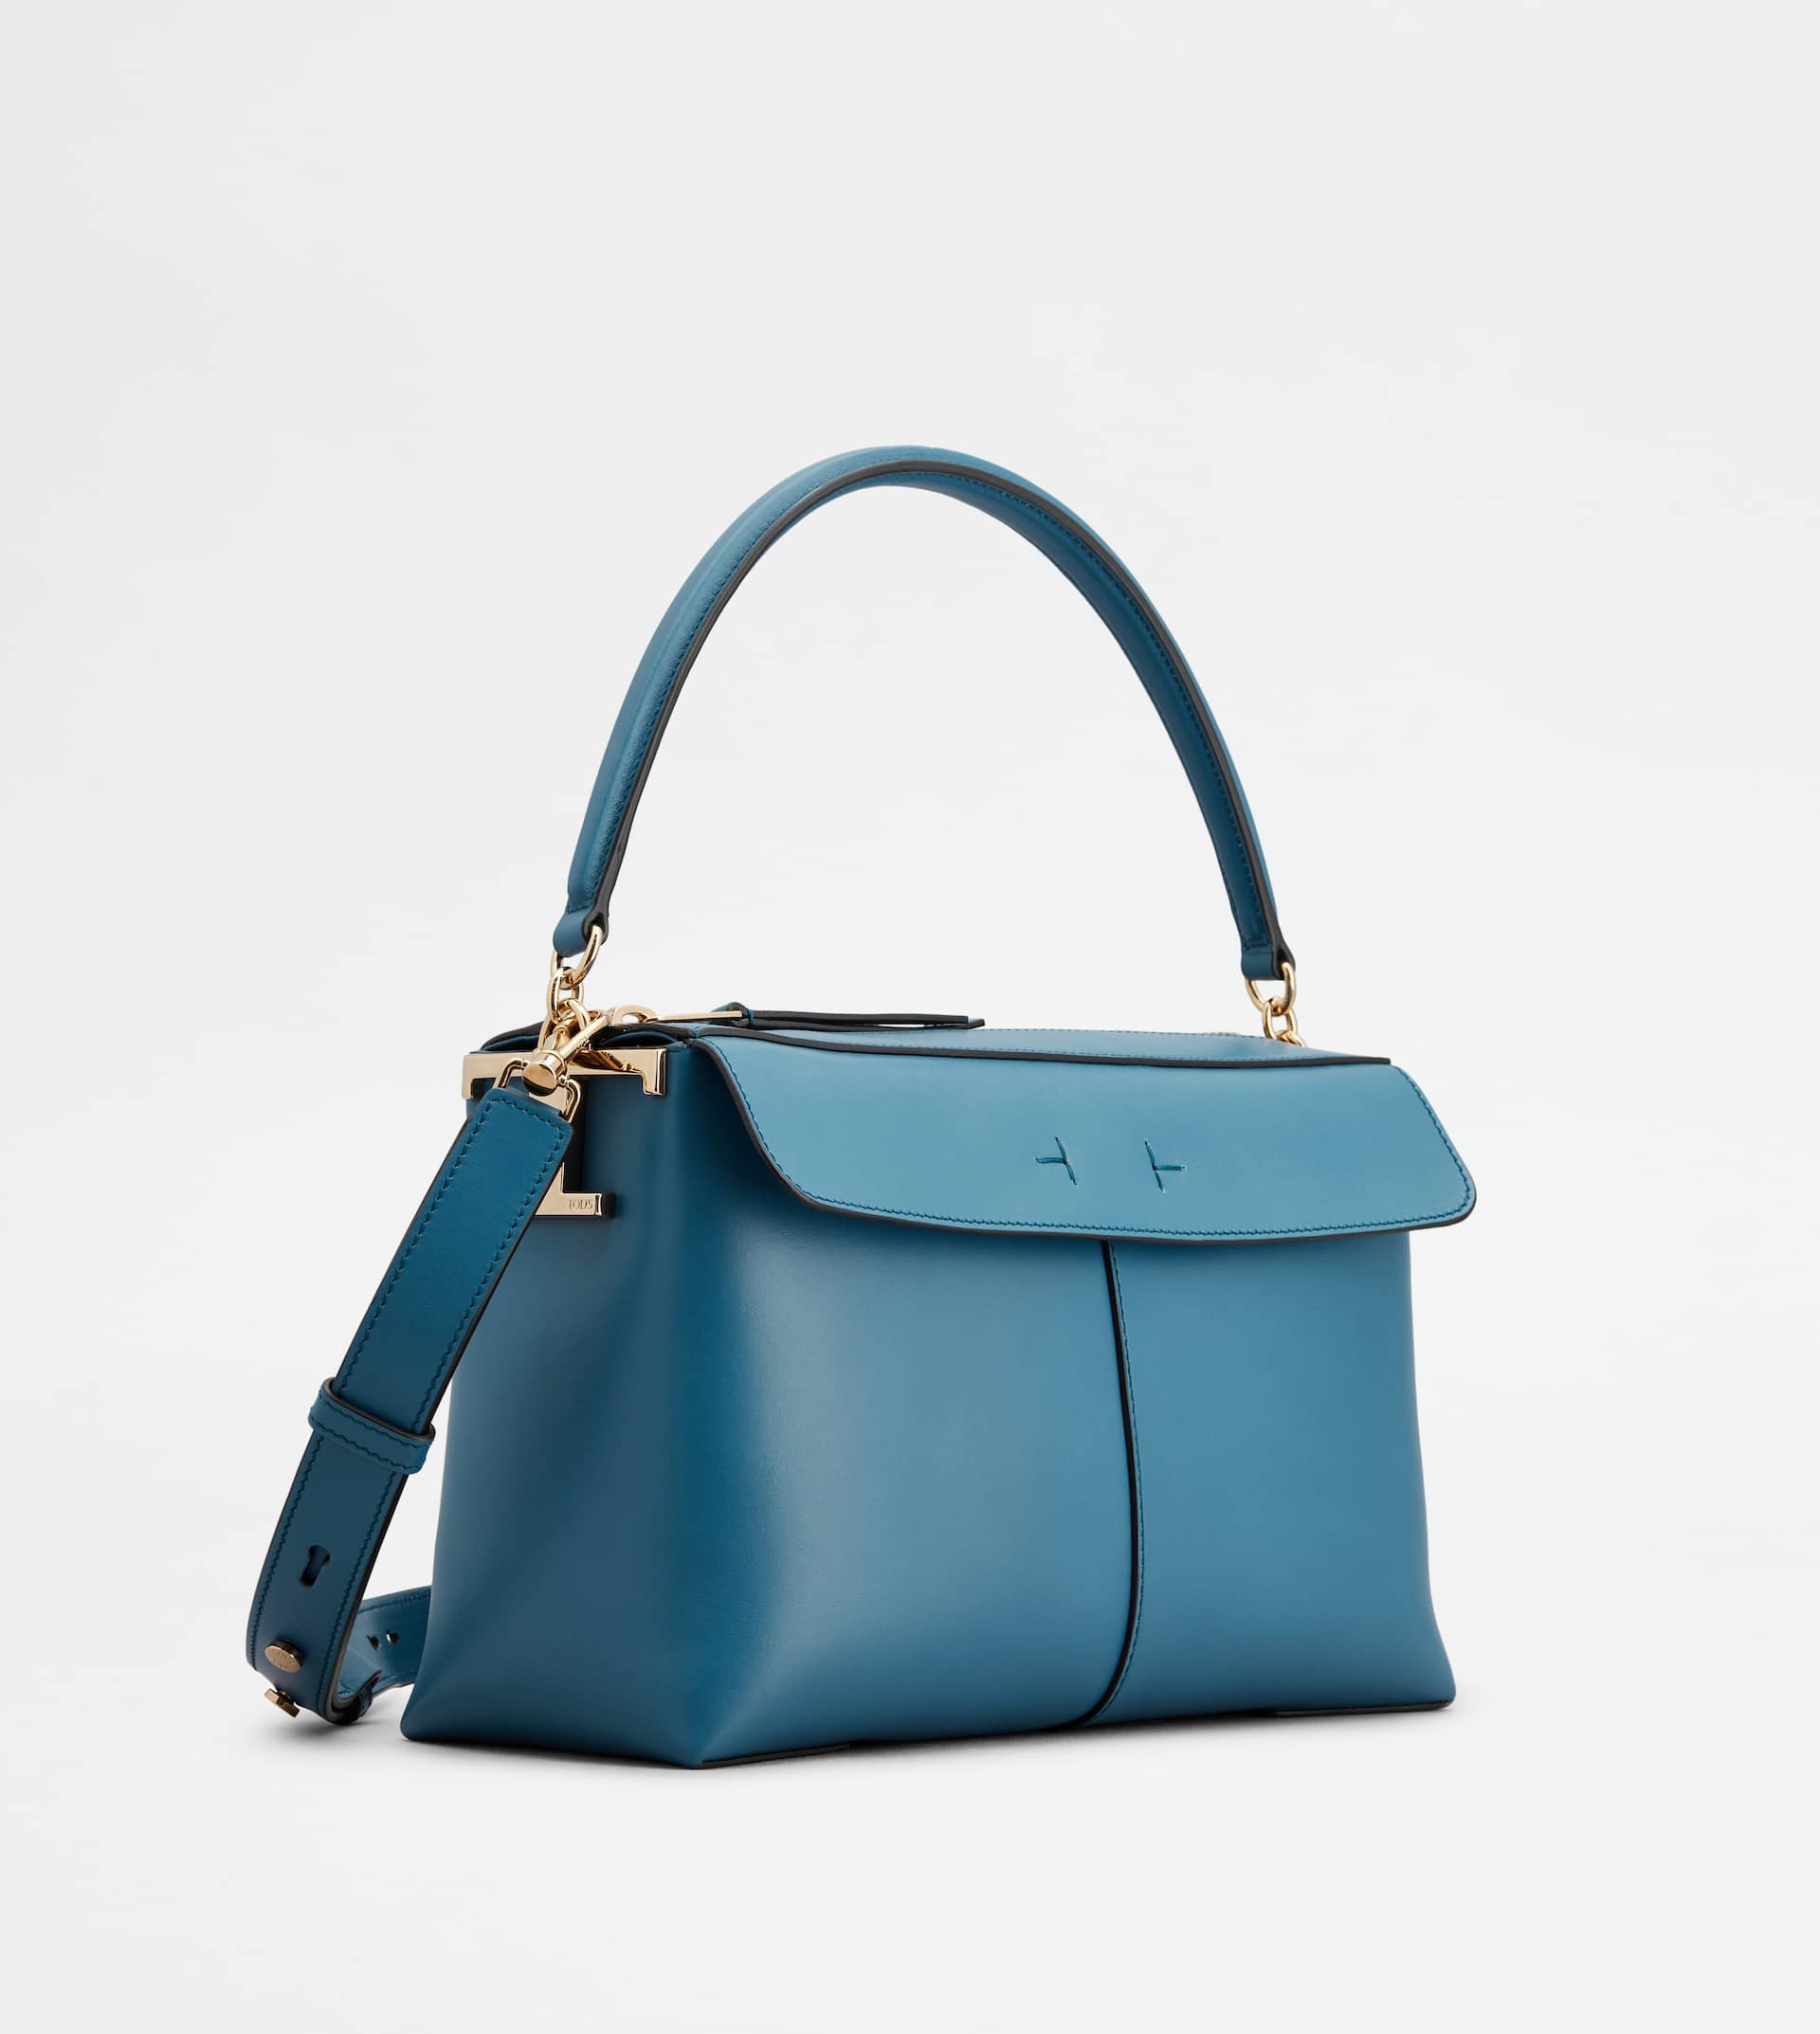 TOD'S T CASE BAULETTO IN LEATHER SMALL - LIGHT BLUE - 3